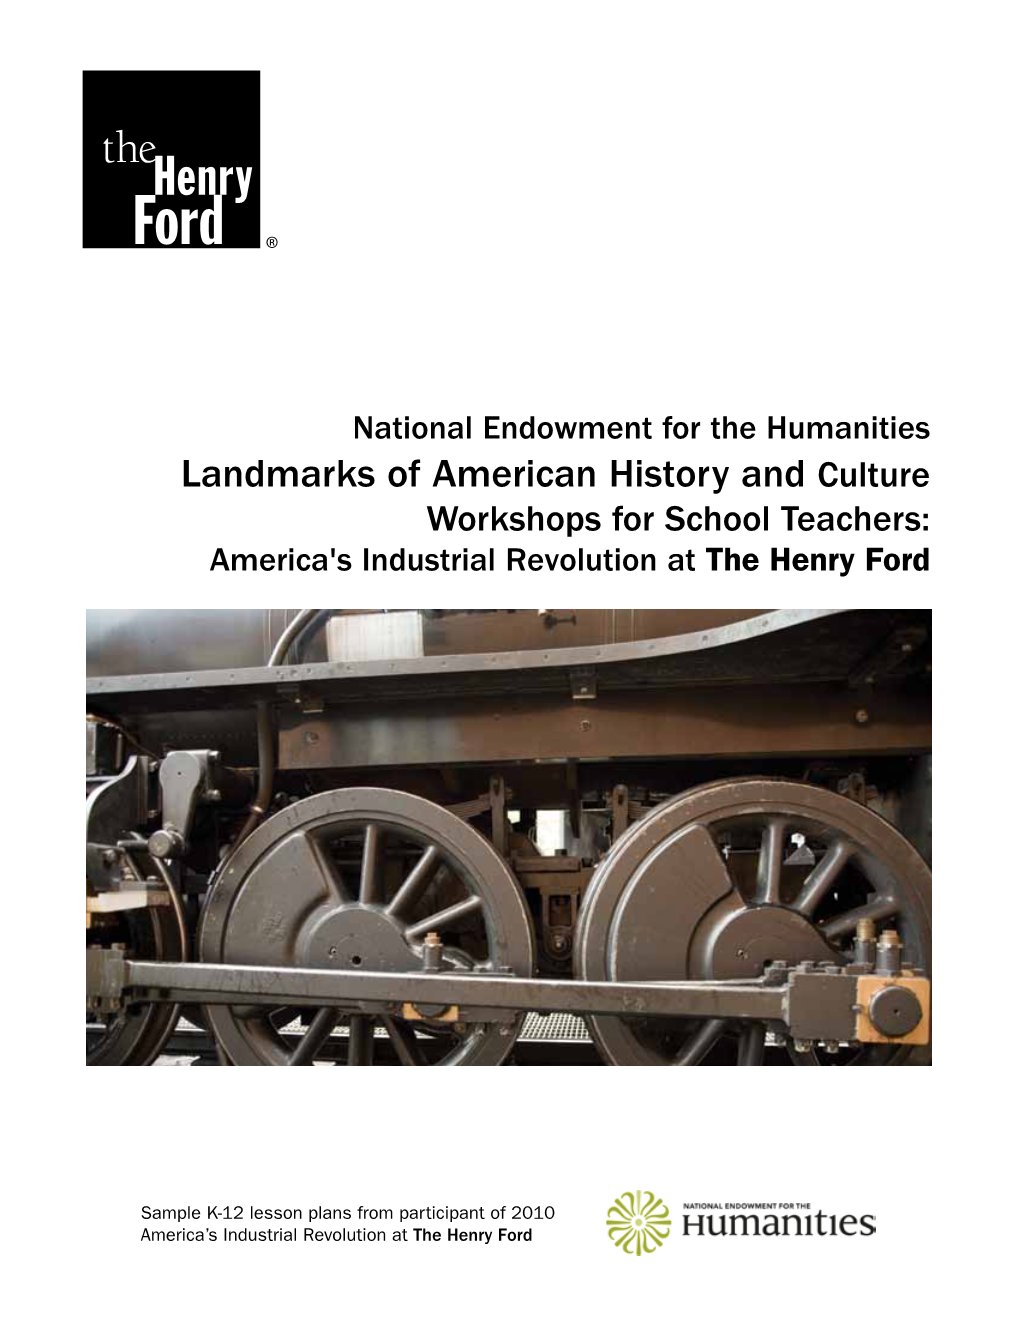 Landmarks of American History and Culture Workshops for School Teachers: America's Industrial Revolution at the Henry Ford